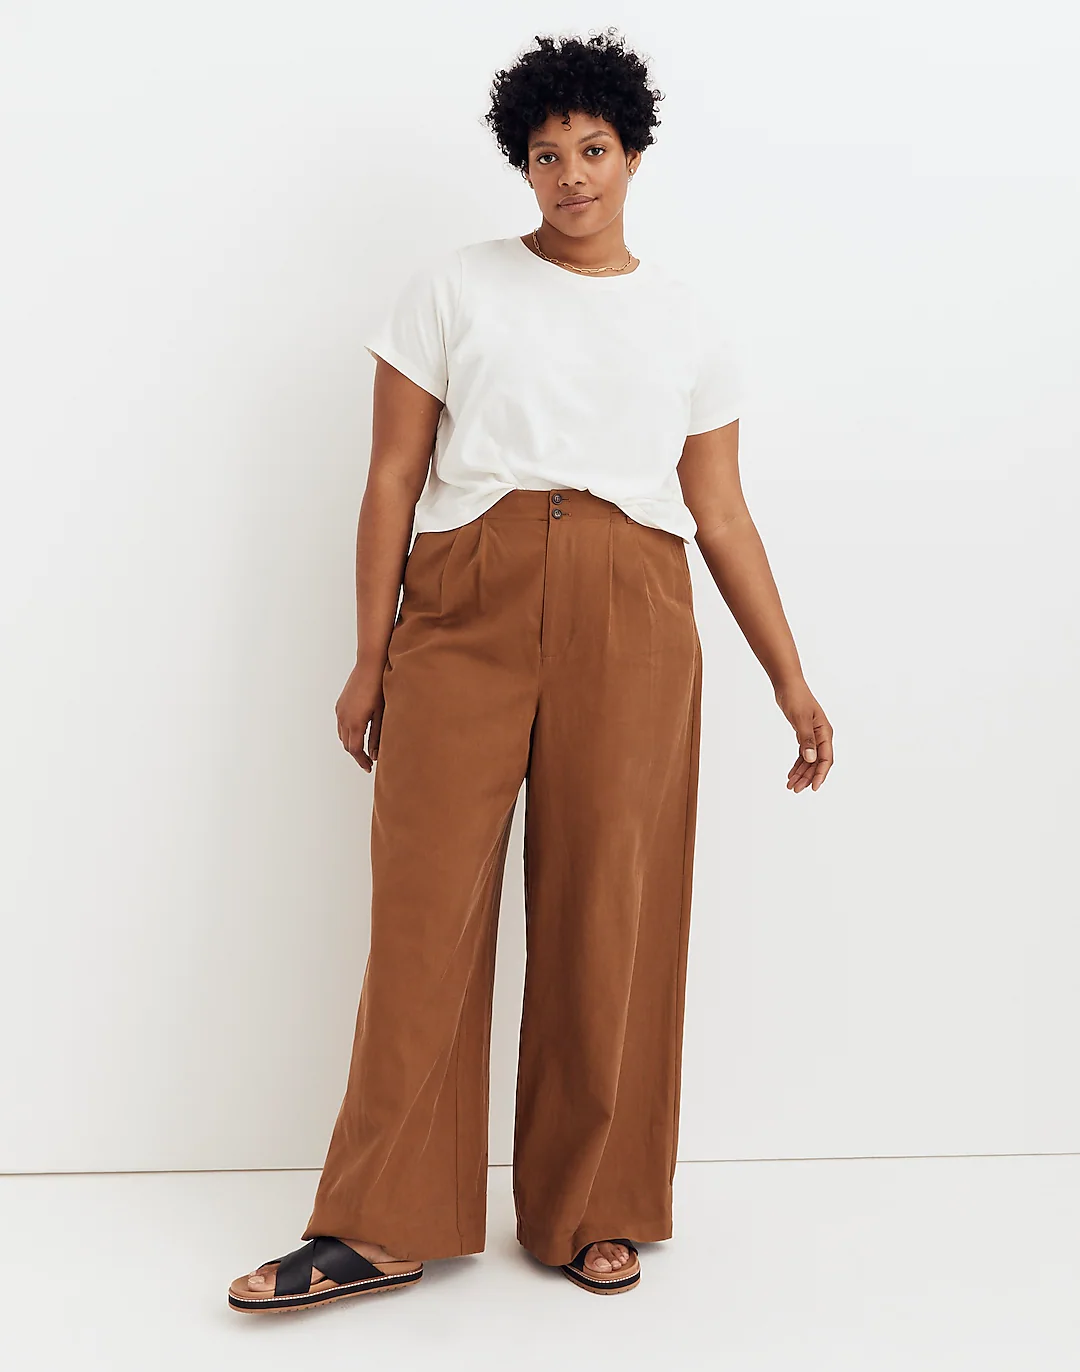 Women's Trousers - Linen, Ponte, Suiting | cabi clothing